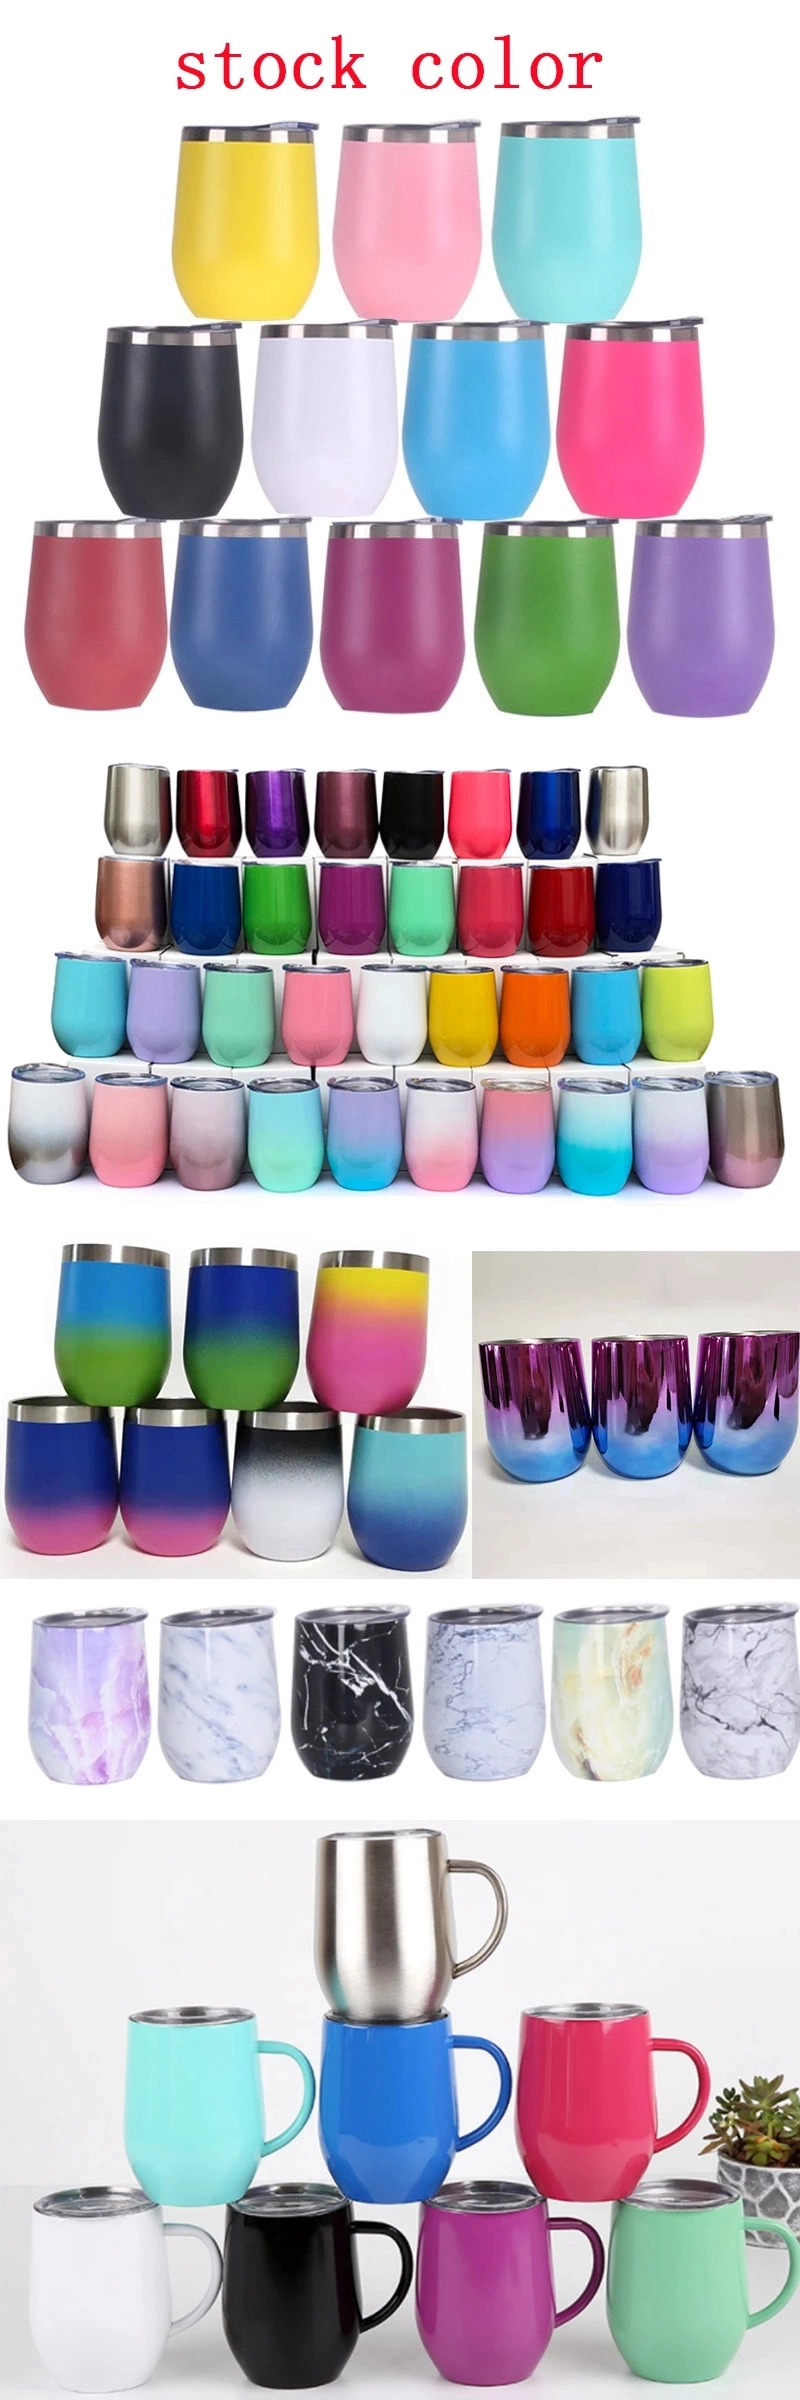 8oz 18/8 Double Wall Stainless Steel Insulated Wine Tumbler Cup Wholesale Sublimation Gift Set 12oz